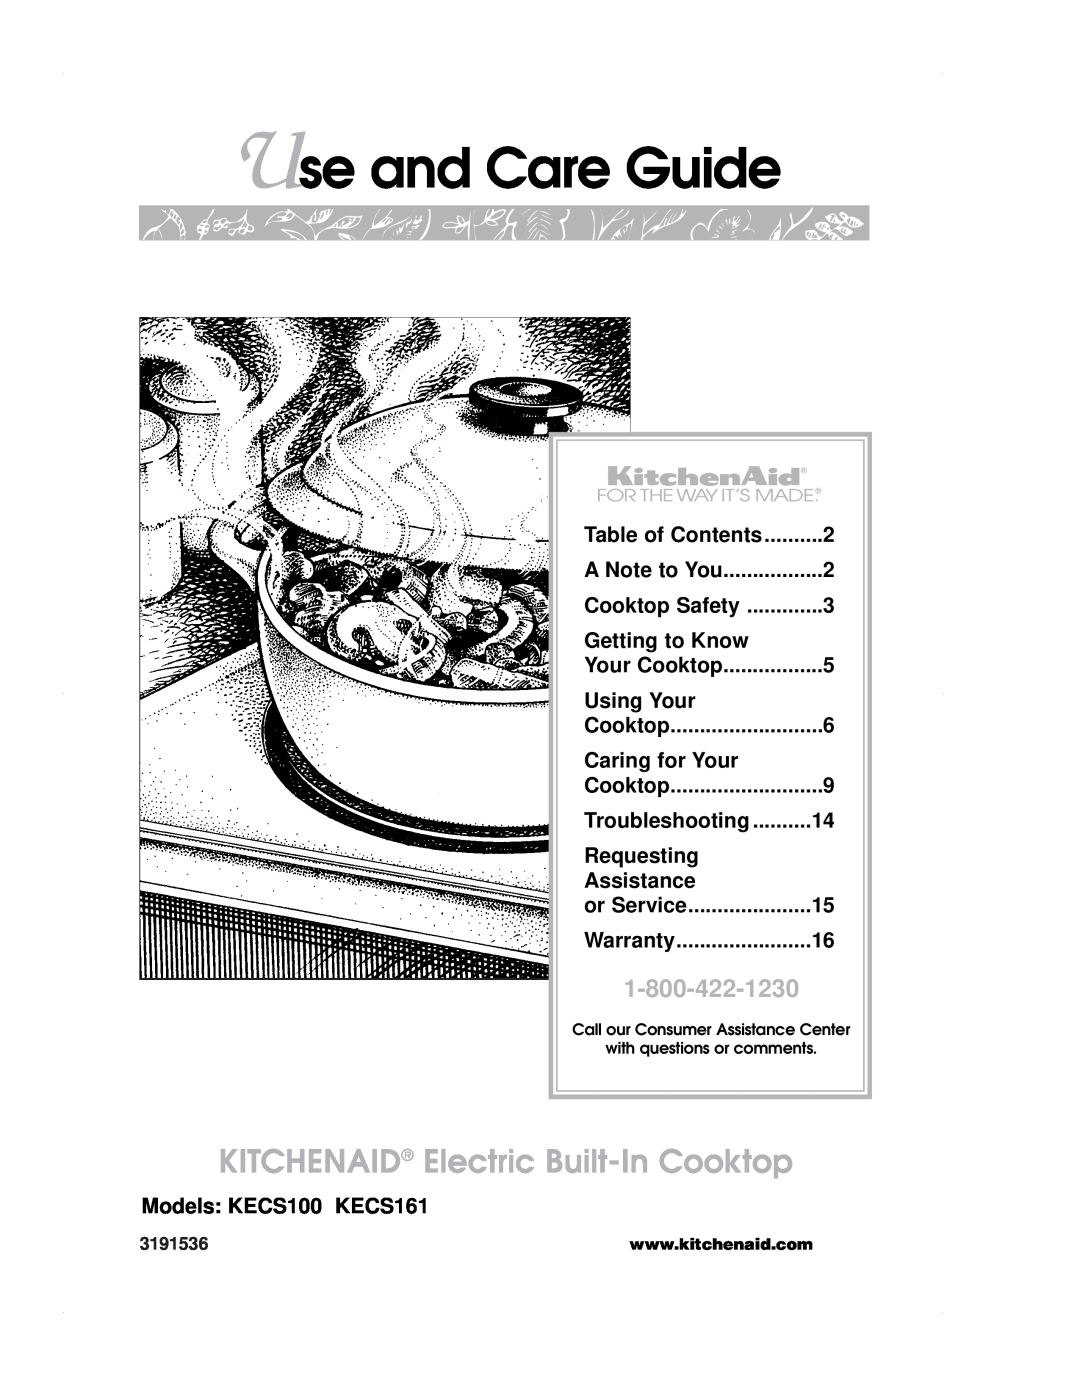 KitchenAid KECS100 warranty Use and Care Guide, KITCHENAID Electric Built-In Cooktop, Table of Contents, Getting to Know 